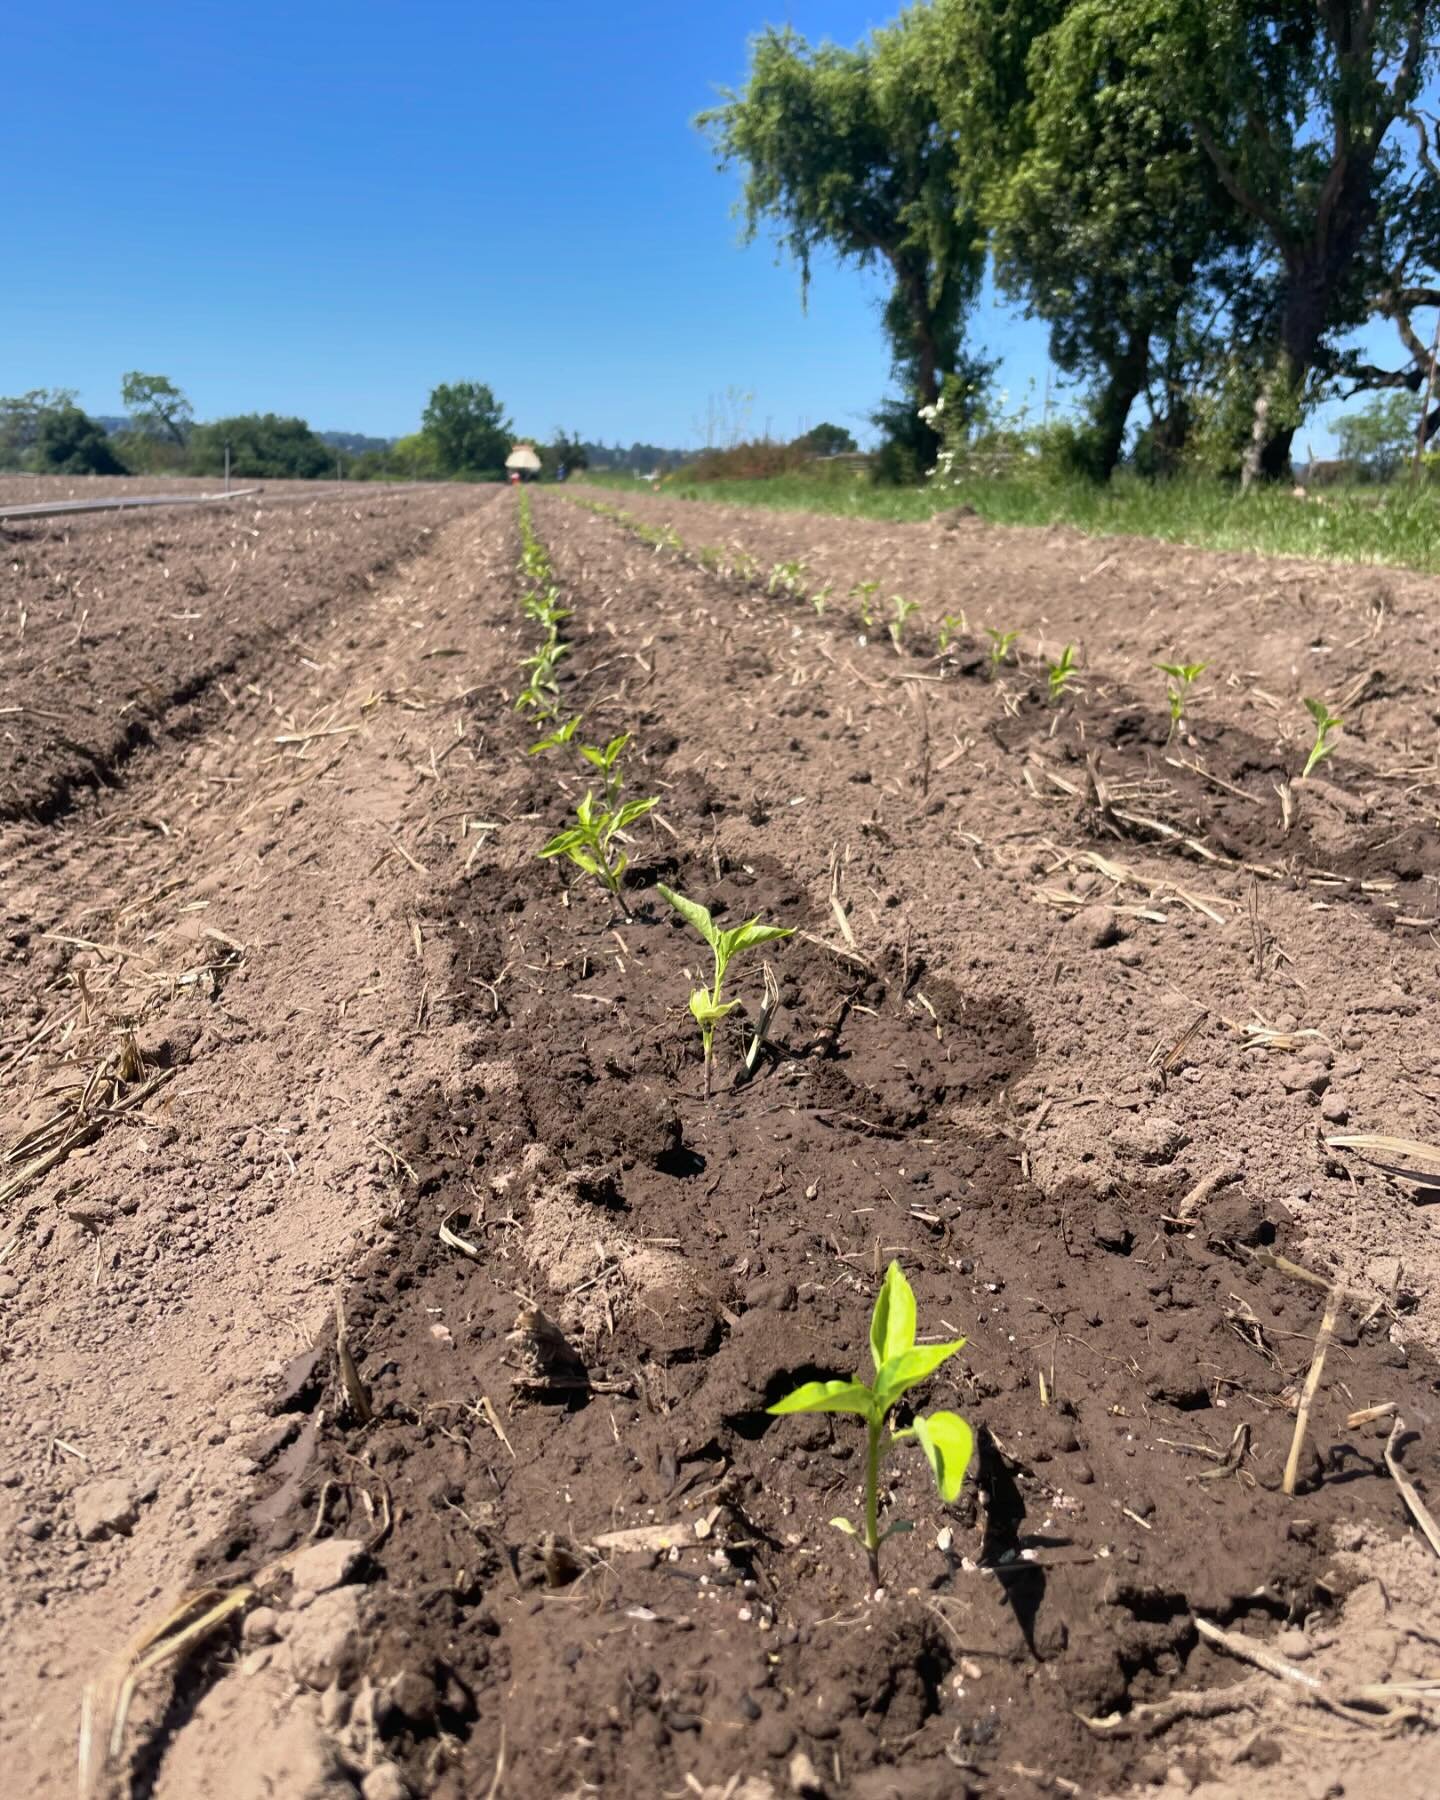 🌶️🌶️First round of peppers going into the ground at @longertablefarm. Summer really is just around the corner!

#eatlocal #supportsmall #farmsforever #foodhub #doinitforthechildren #vivalacausa #feedcooperative #cooperative #cooperativelyowned #far